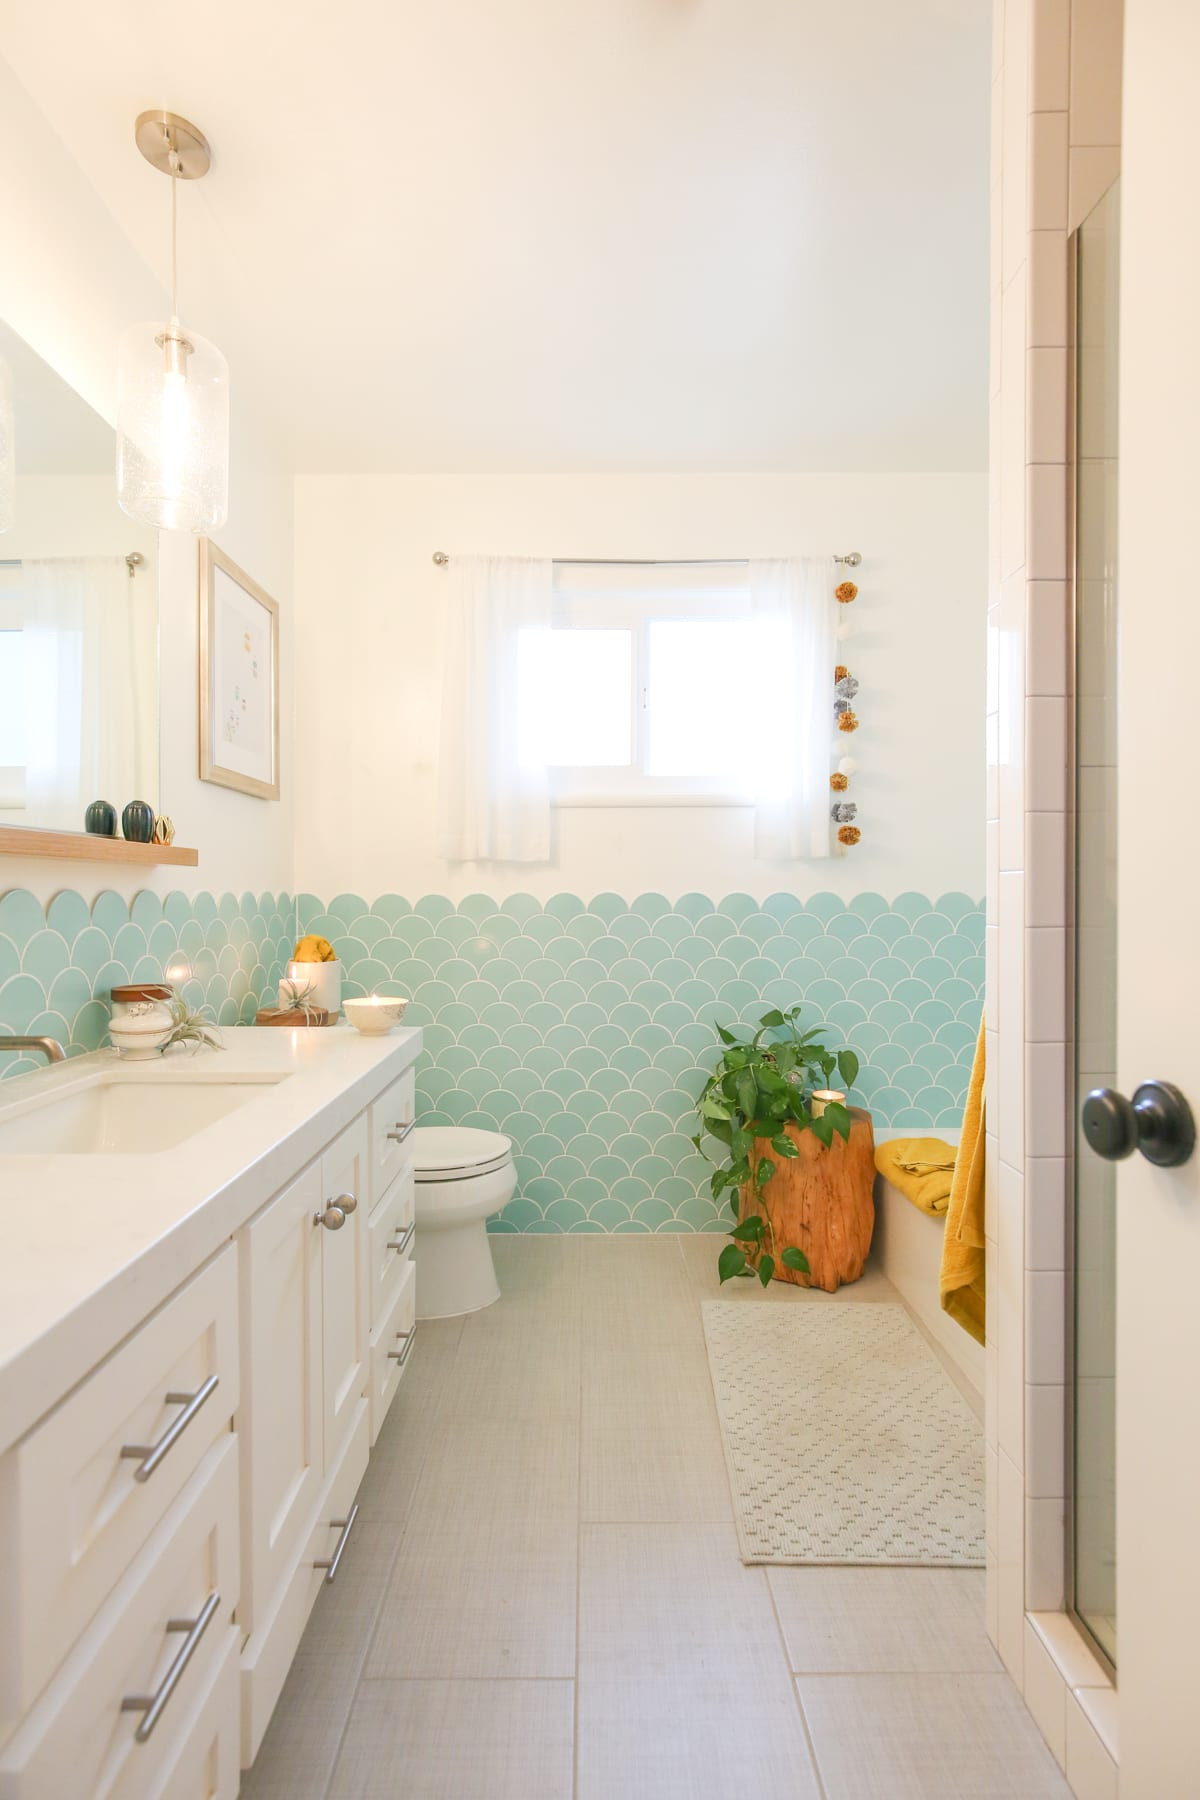 Kids Guest Bathroom Ideas
 Room Reveal Kids and Guest Bathroom Lovely Indeed